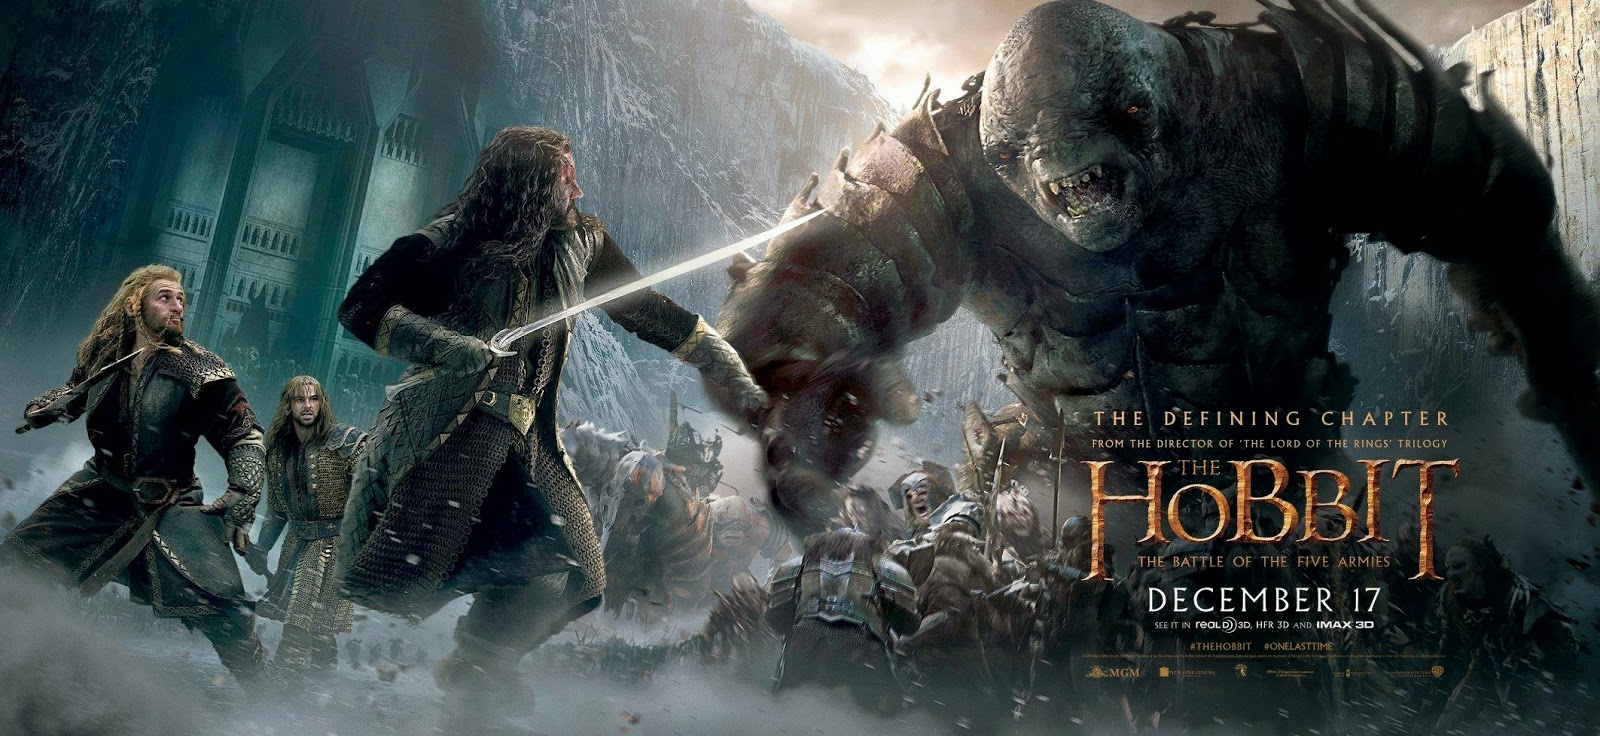 Download The Hobbit The Desolation of Smaug wallpaper